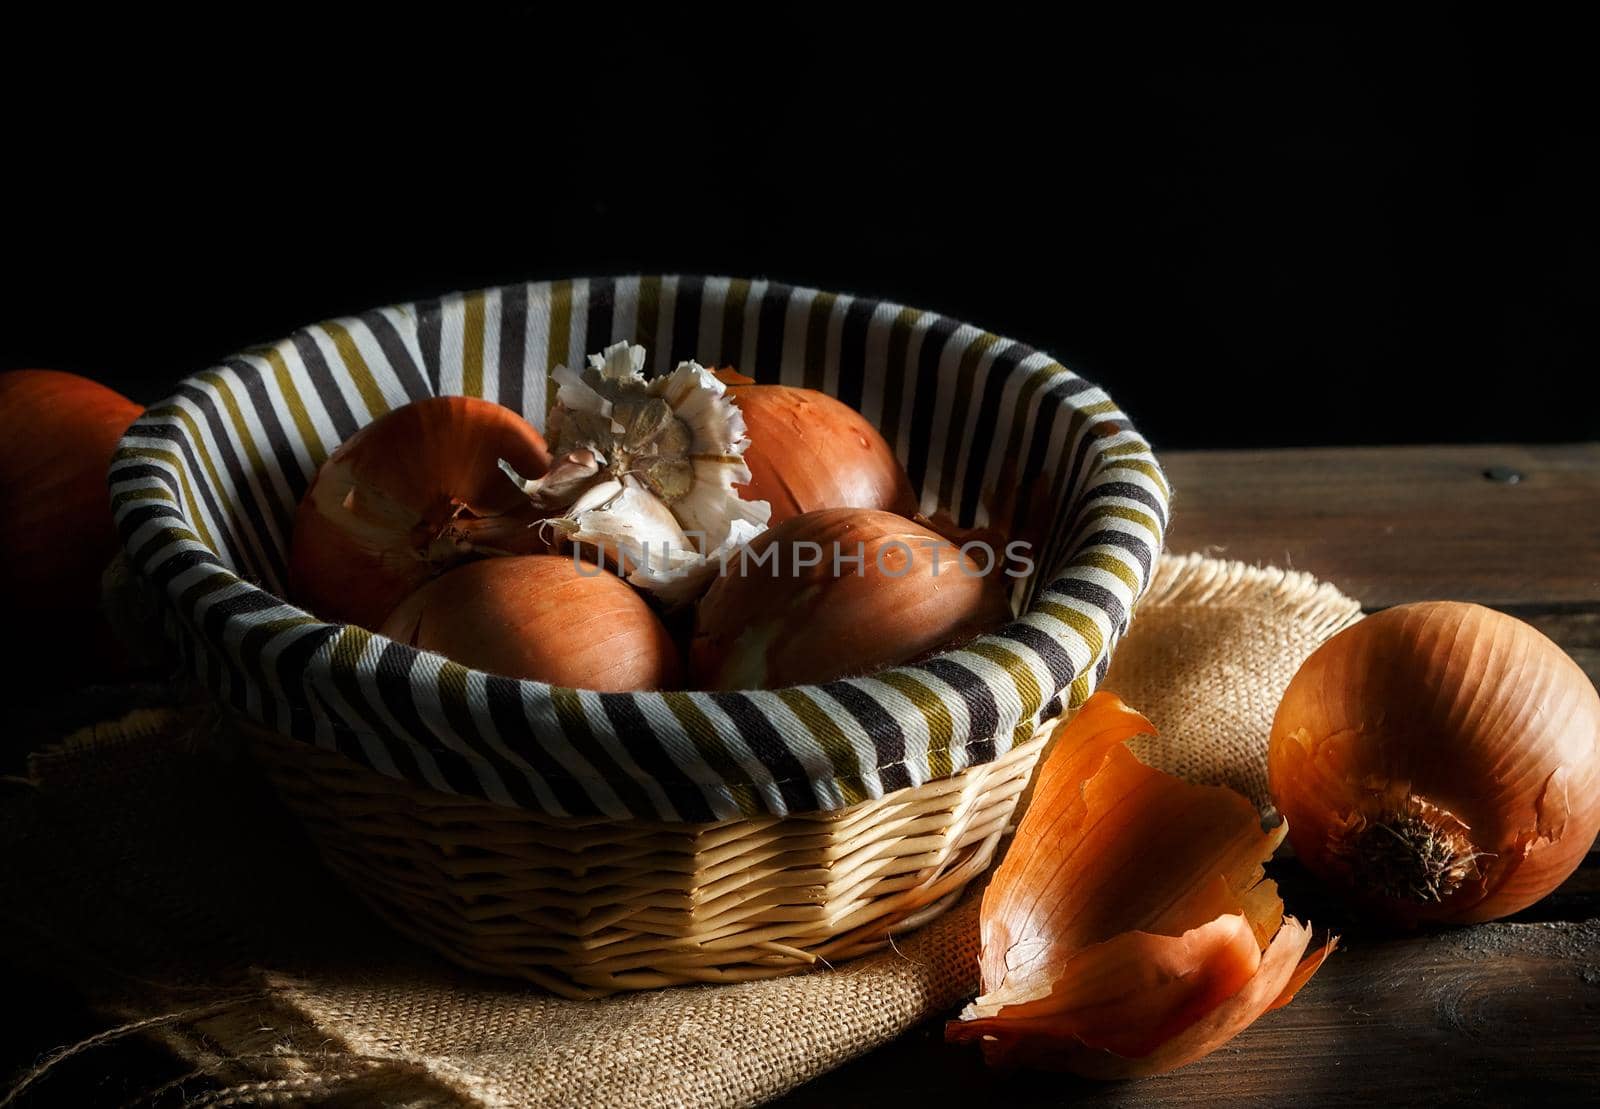 Onions and head of garlic in a wicker basket on wooden boards and sackcloth on black background. Rustic style. Horizontal image.